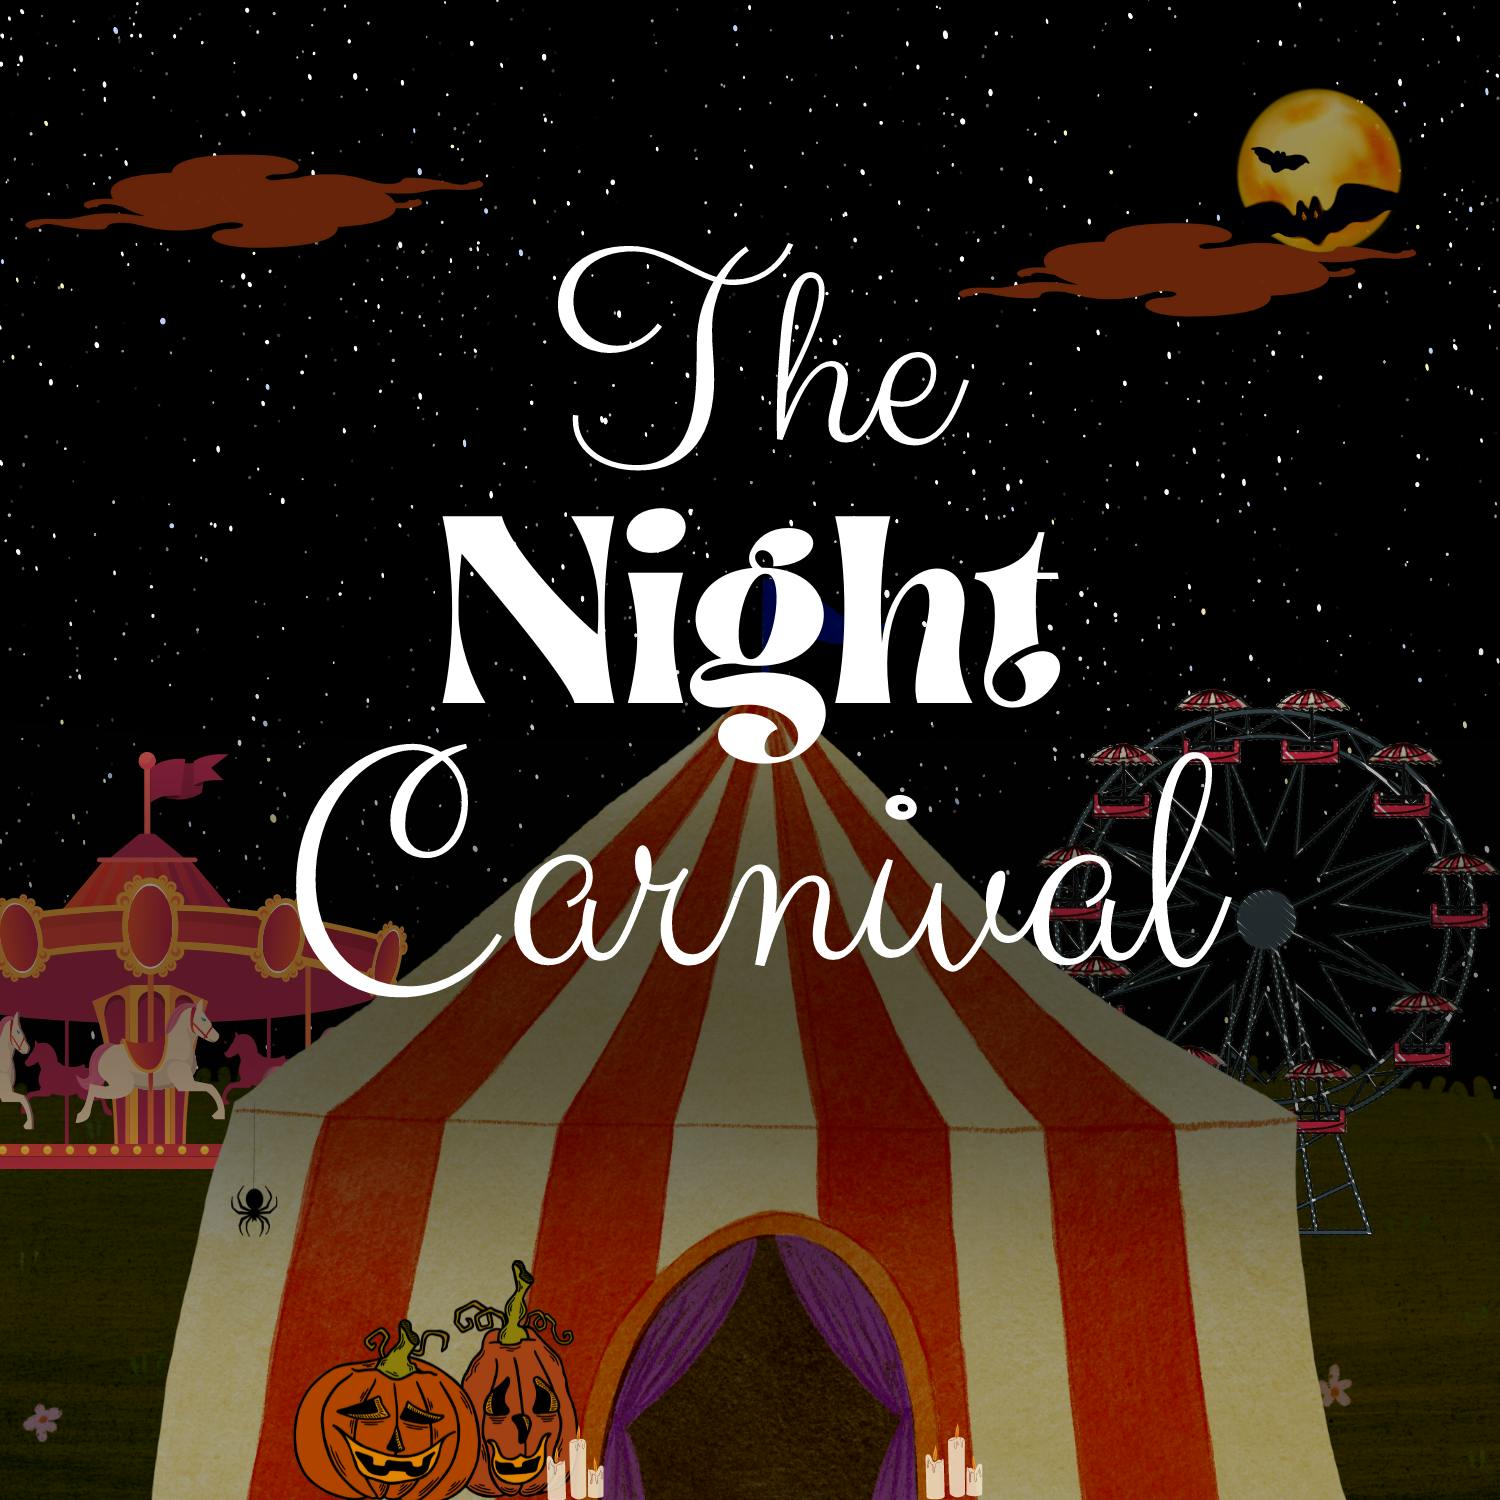 The Night Carnival